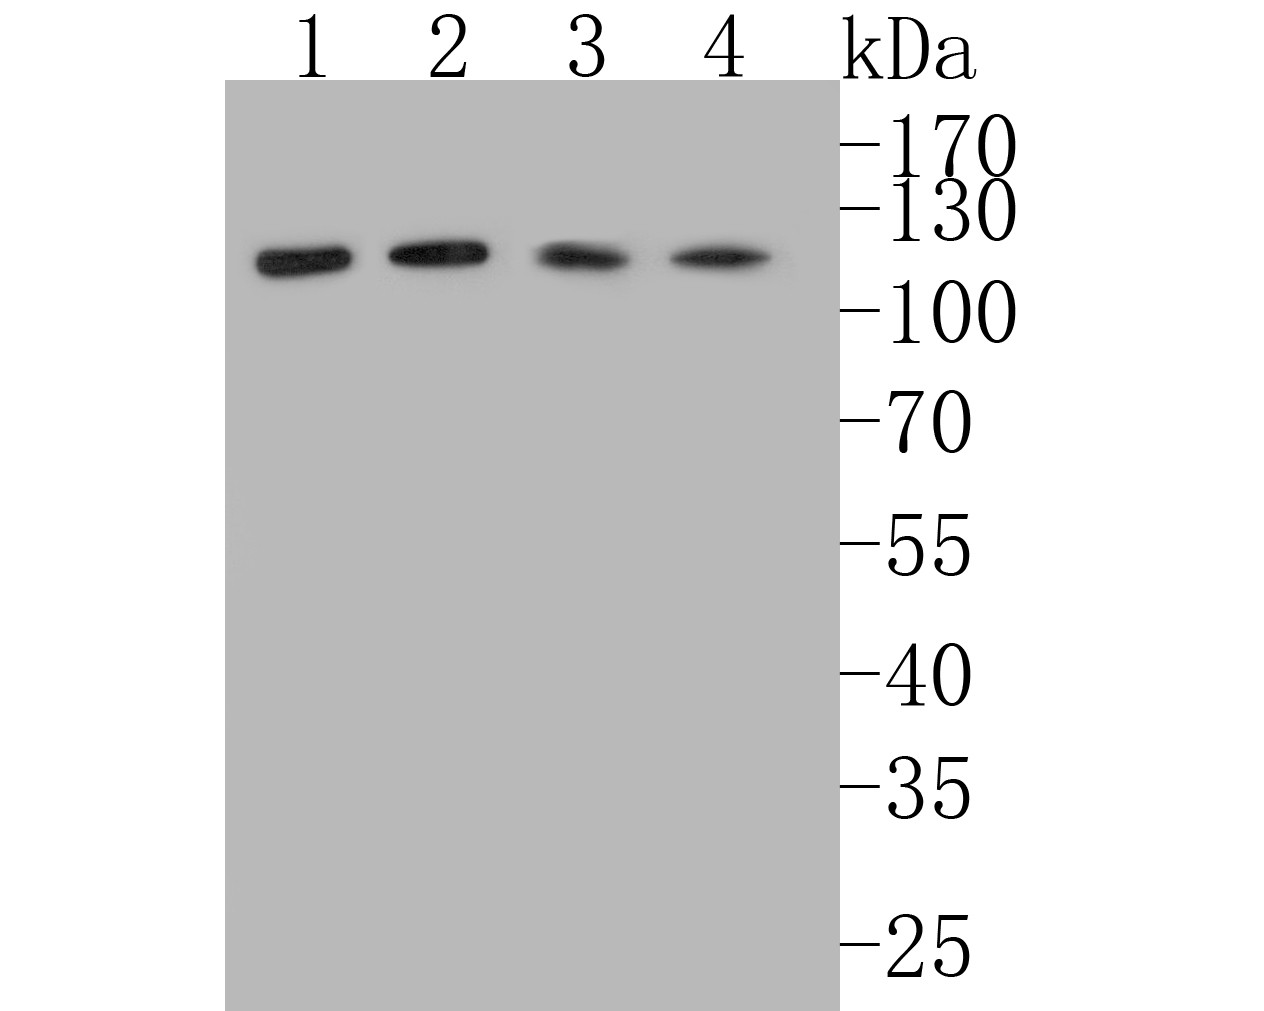 Western blot analysis of Fibulin 5 on different lysates. Proteins were transferred to a PVDF membrane and blocked with 5% BSA in PBS for 1 hour at room temperature. The primary antibody (HA600044, 1/500) was used in 5% BSA at room temperature for 2 hours. Goat Anti-Mouse IgG - HRP Secondary Antibody (HA1006) at 1:200,000 dilution was used for 1 hour at room temperature.<br />
Positive control: <br />
Lane 1: A549 cell lysate<br />
Lane 2: SKOV-3 cell lysate<br />
Lane 3: Hela cell lysate<br />
Lane 4: SiHa cell lysate<br />
<br />
Predicted band size: 50 kDa<br />
Observed band size: 110 kDa (Homodimer)